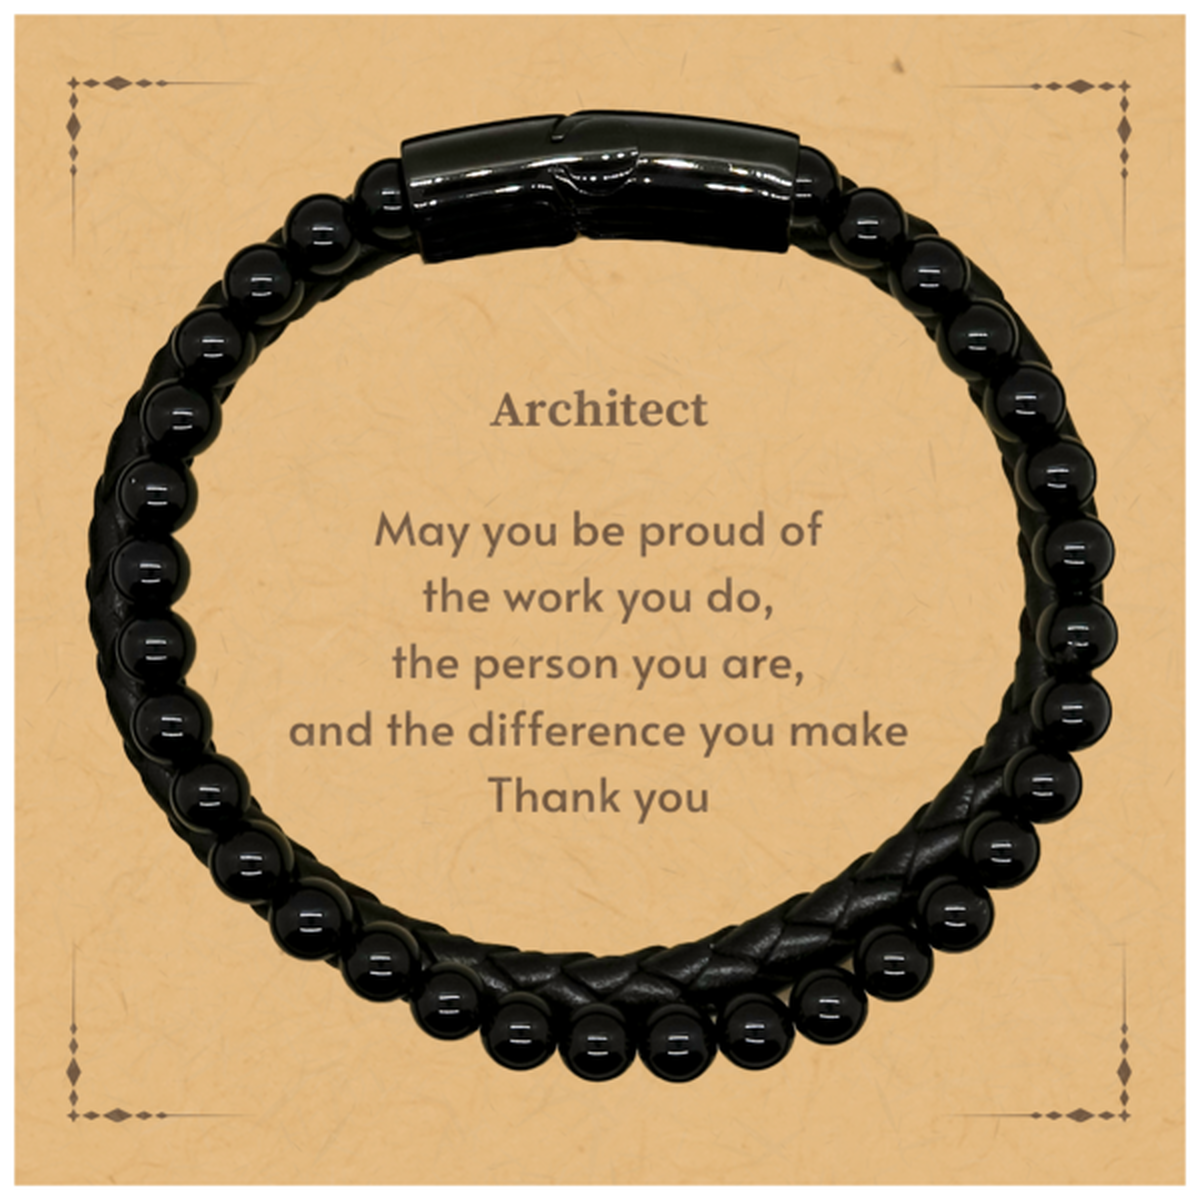 Heartwarming Stone Leather Bracelets Retirement Coworkers Gifts for Architect, Architect May You be proud of the work you do, the person you are Gifts for Boss Men Women Friends